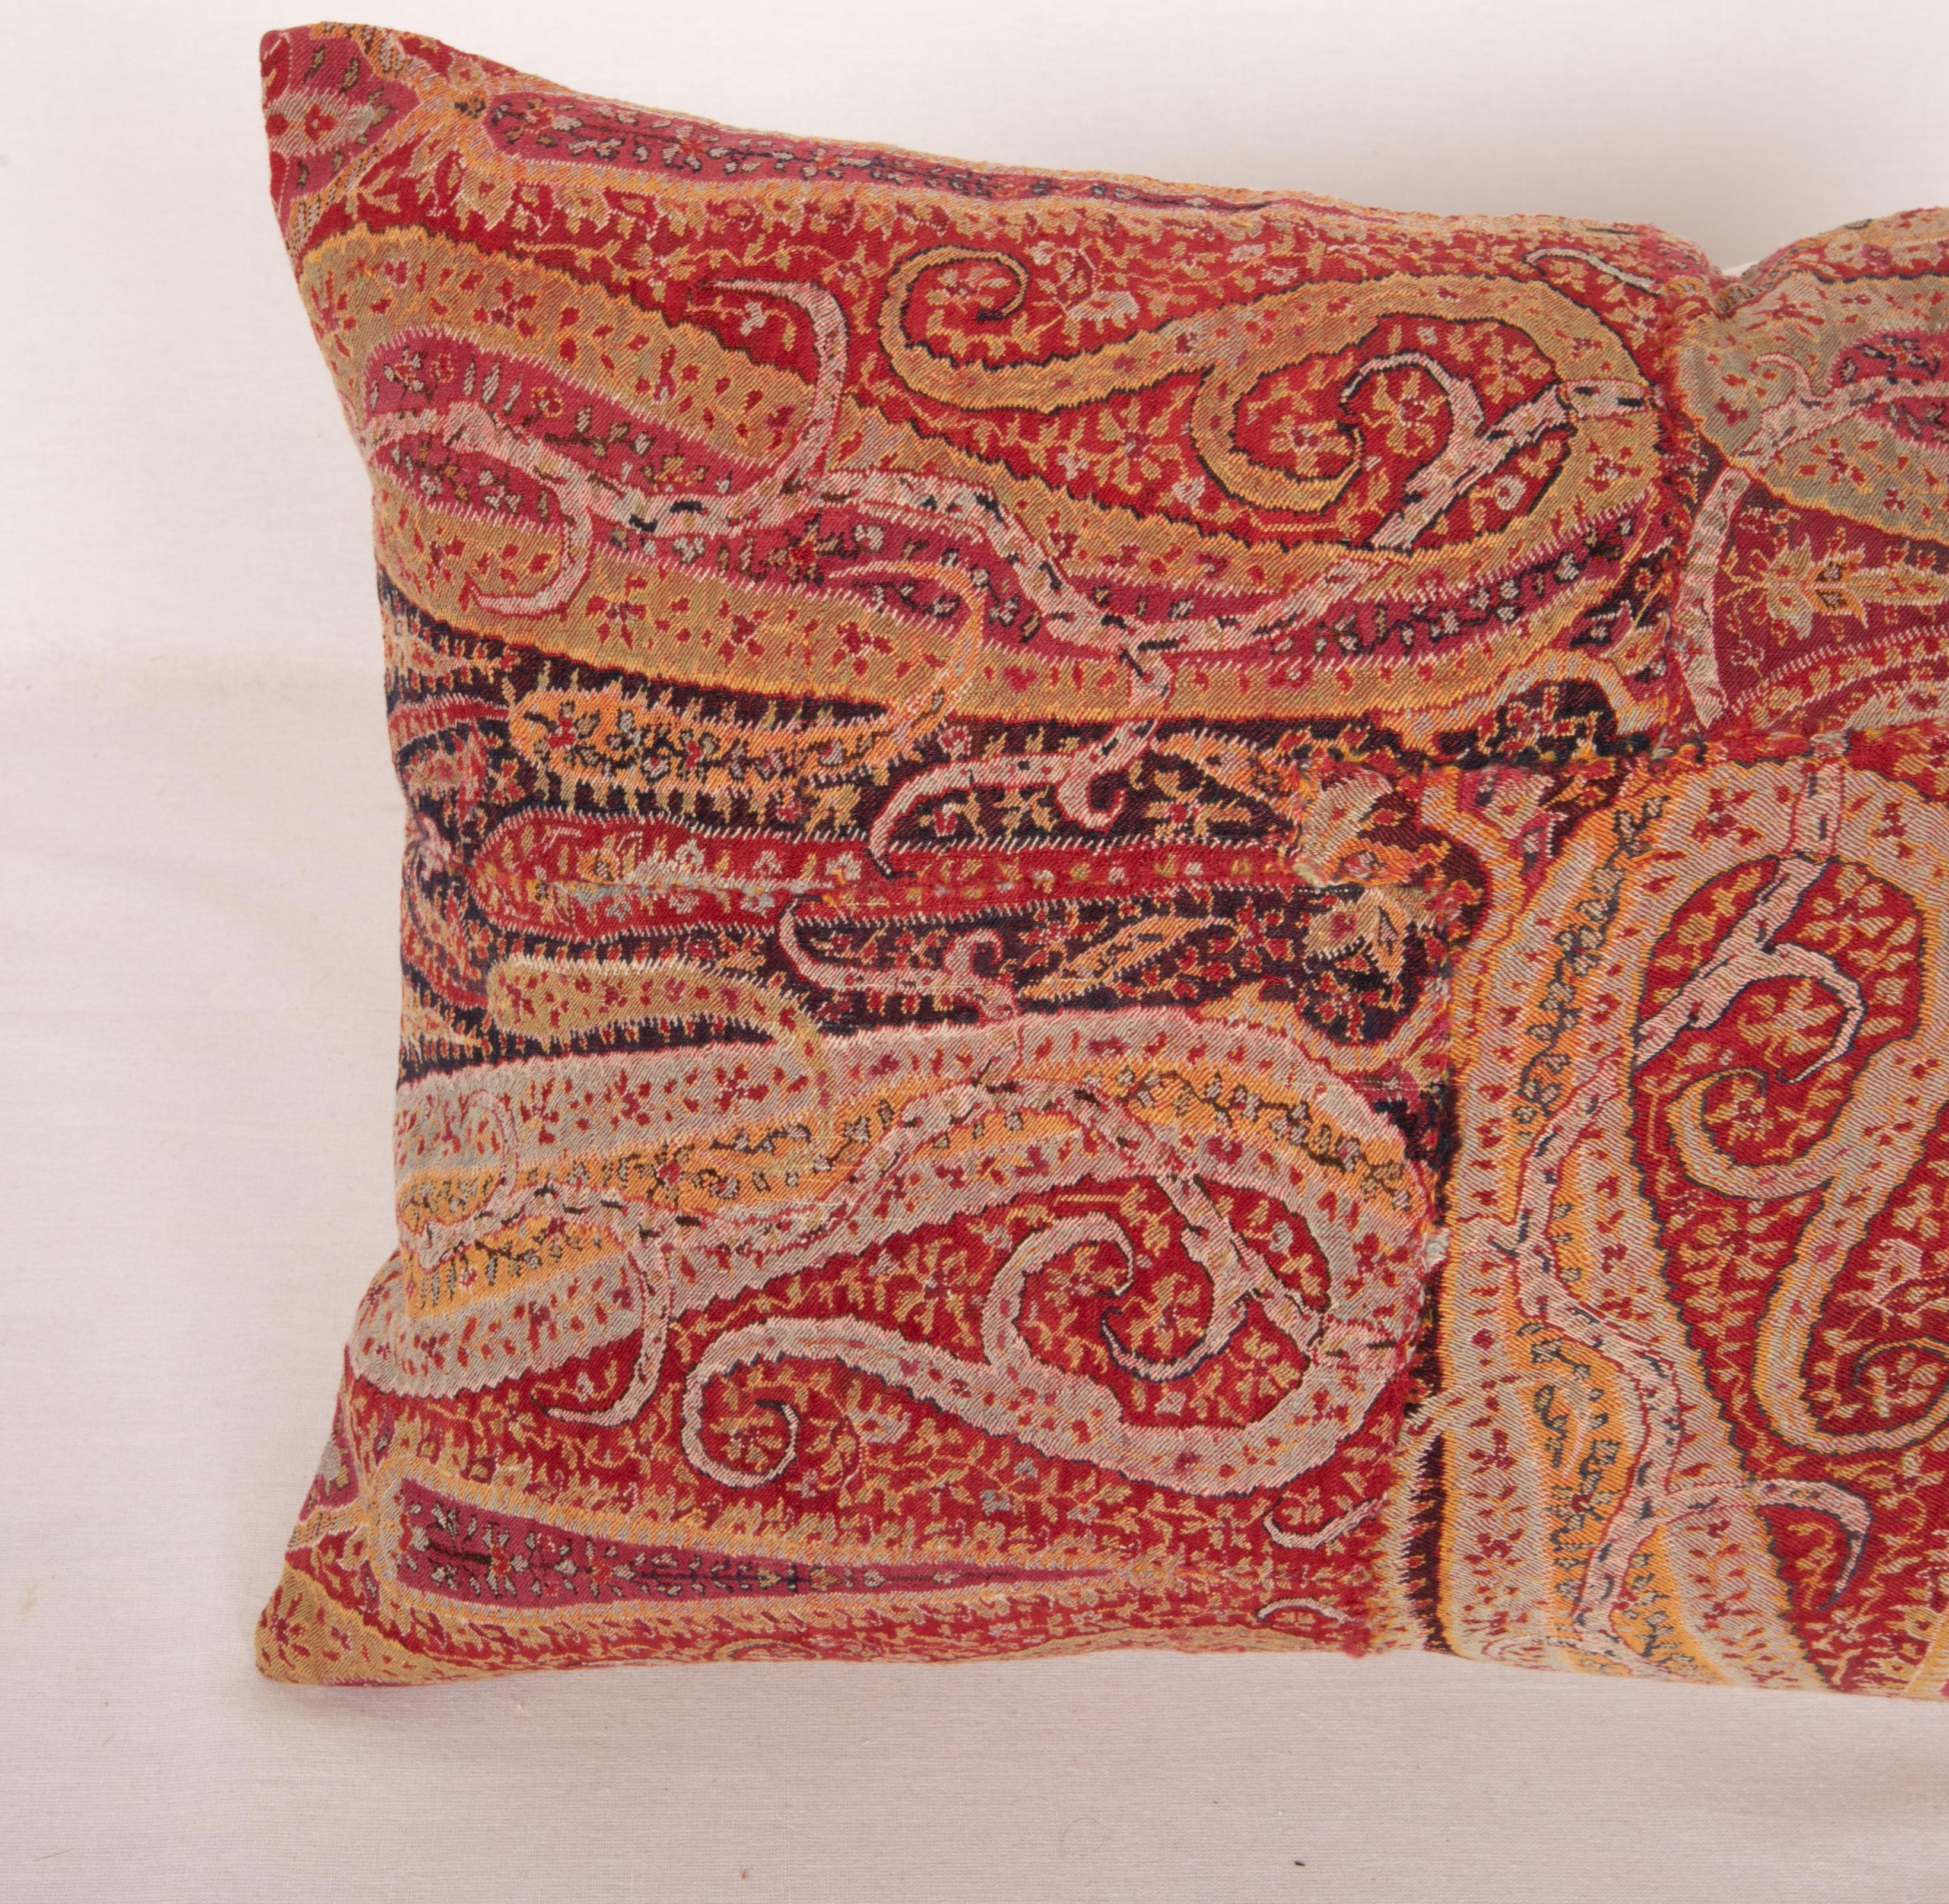 Islamic Antique Pillow Case Made from a 1840 Kashmir Shawl